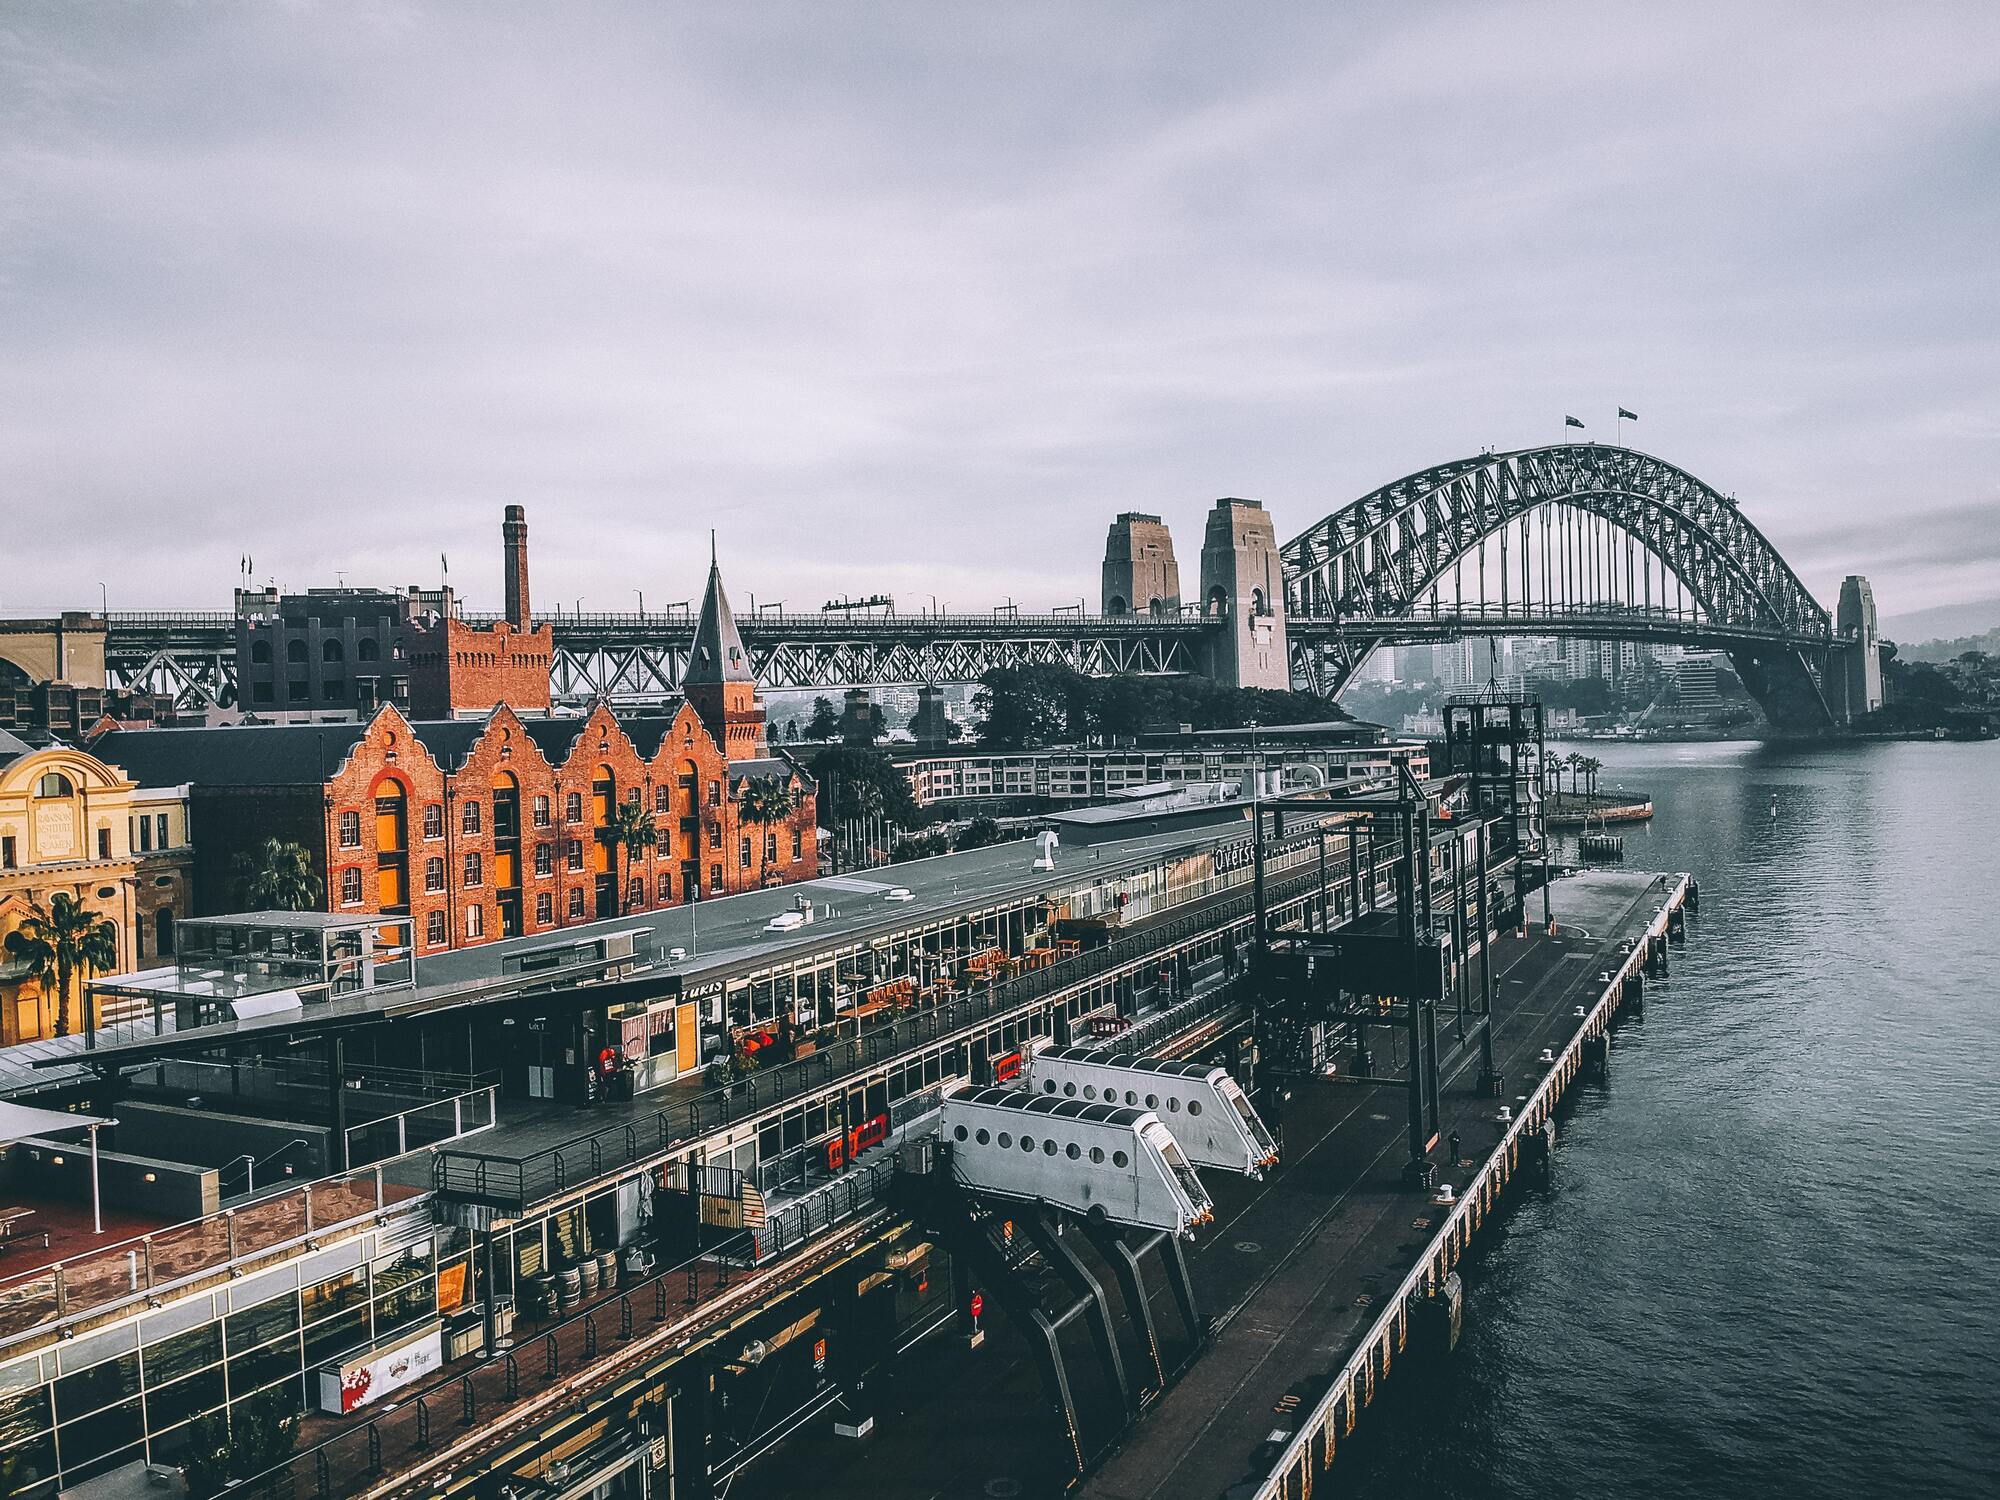 <p>Sydney Bridge passes over Sydney Harbour and is one of the city's most characteristic sites along with the Opera House. The bridge connects the financial area with the north coast of Sydney which is more commercial and residential. From the bridge, you can get incredible views of the whole city.</p> <p>Photo: Road Trip with Raj / Unsplash</p>